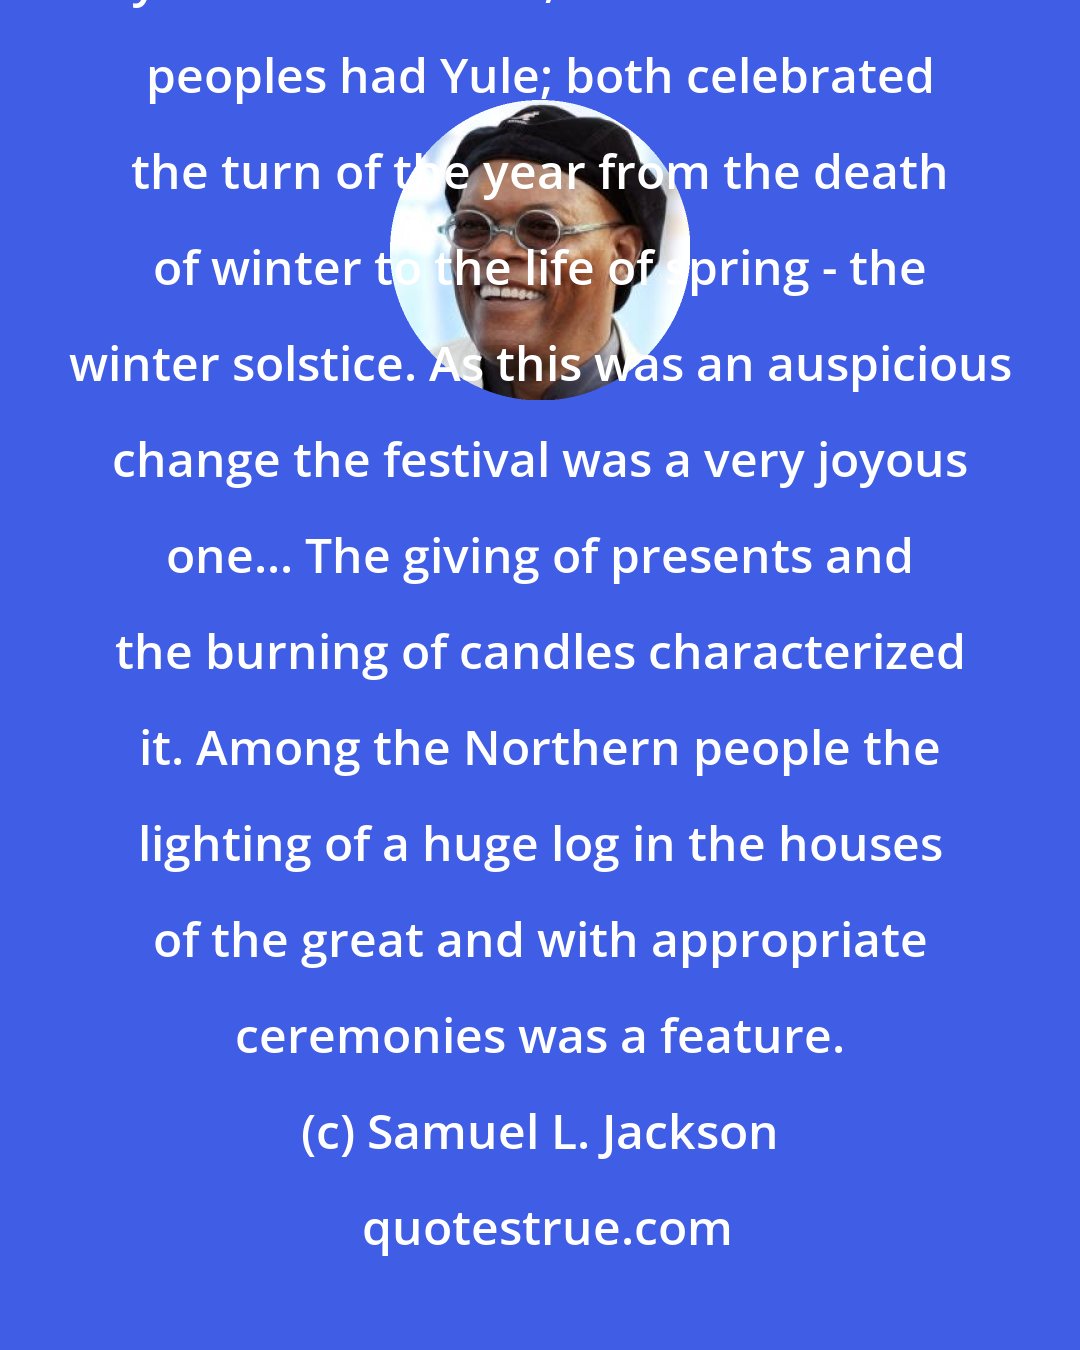 Samuel L. Jackson: The Romans had, like other Pagan nations, a nature festival, called by them Saturnalia, and the Northern peoples had Yule; both celebrated the turn of the year from the death of winter to the life of spring - the winter solstice. As this was an auspicious change the festival was a very joyous one... The giving of presents and the burning of candles characterized it. Among the Northern people the lighting of a huge log in the houses of the great and with appropriate ceremonies was a feature.